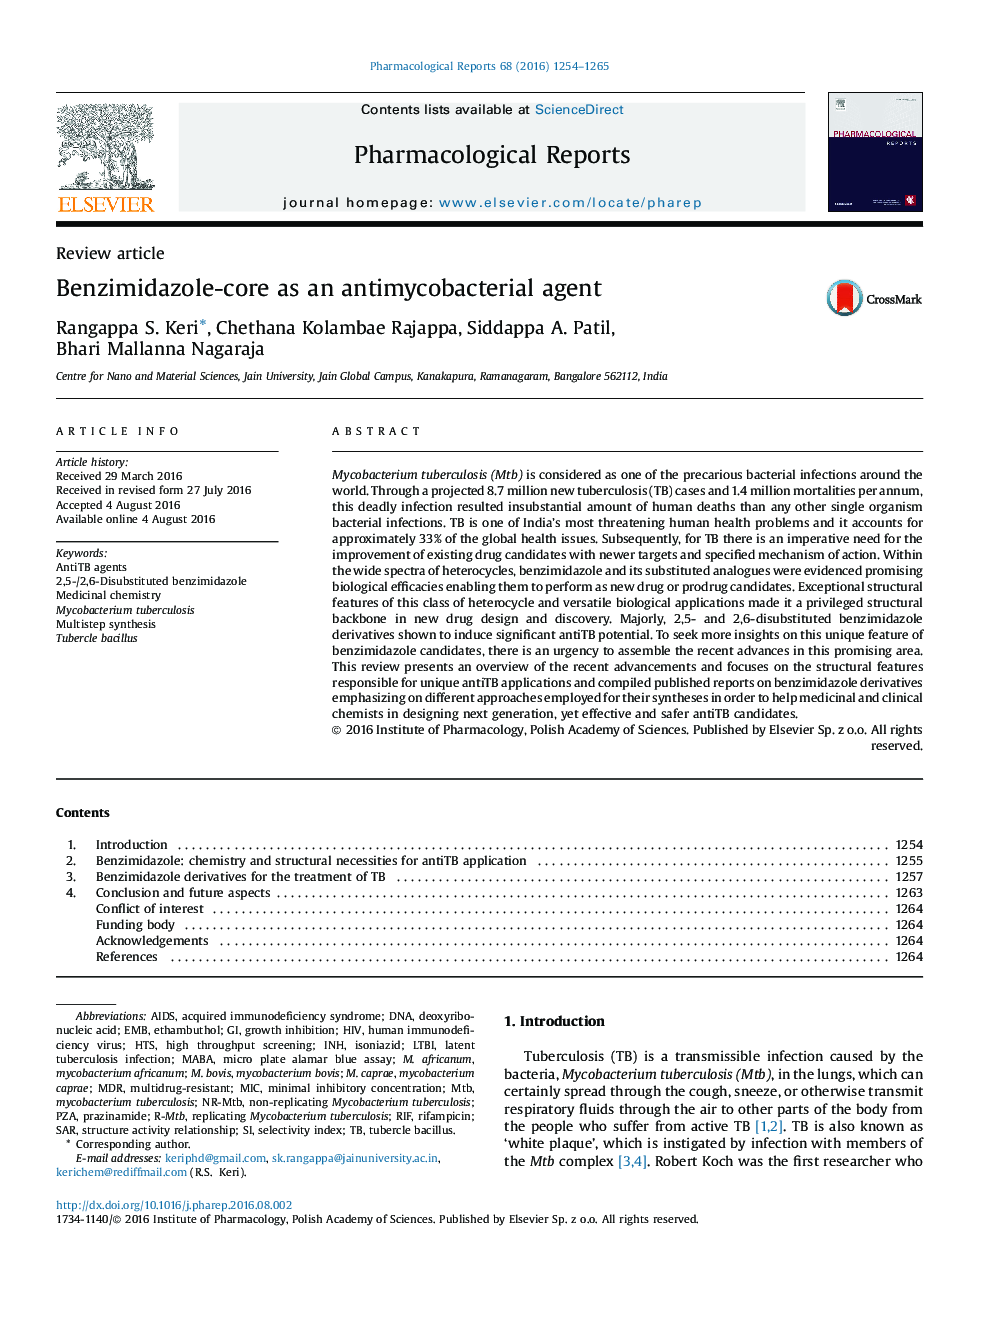 Benzimidazole-core as an antimycobacterial agent